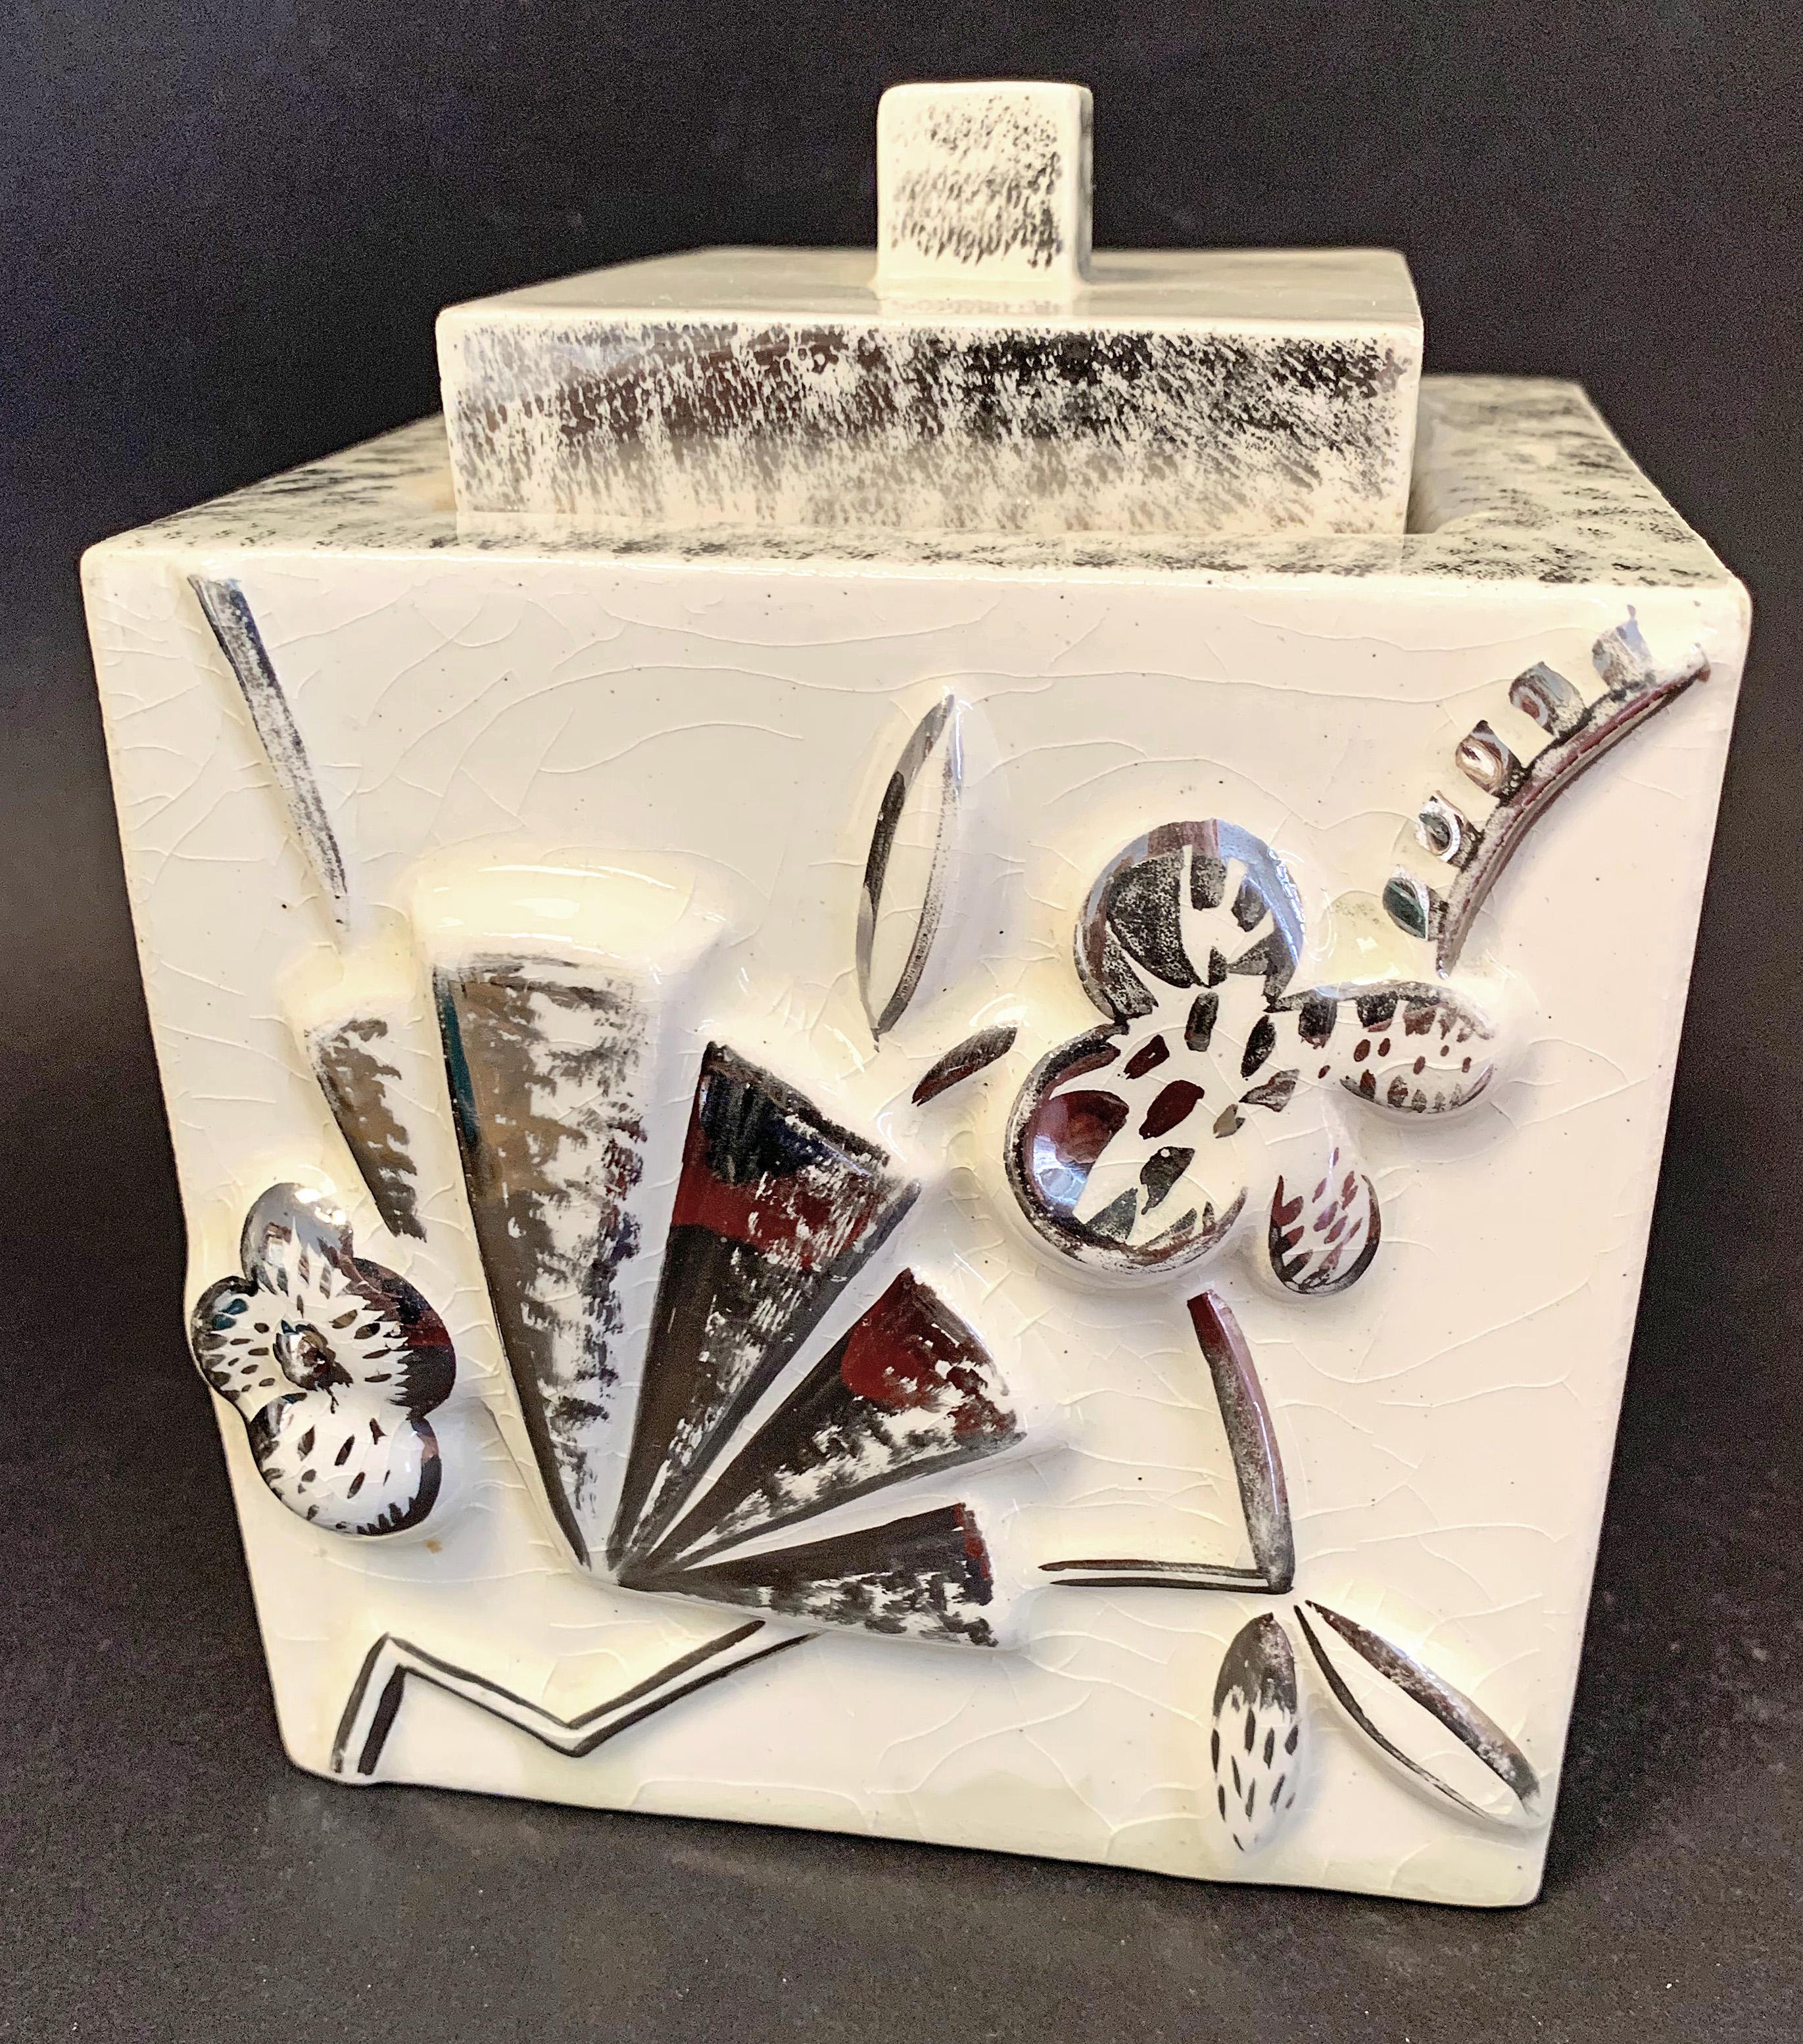 Striking in its originality and abstraction, this high-style Art Deco lidded porcelain box is decorated with a series of foliate and abstract motifs, executed in silver glaze, that hint at gears and fans. The combination of a pale ivory glaze